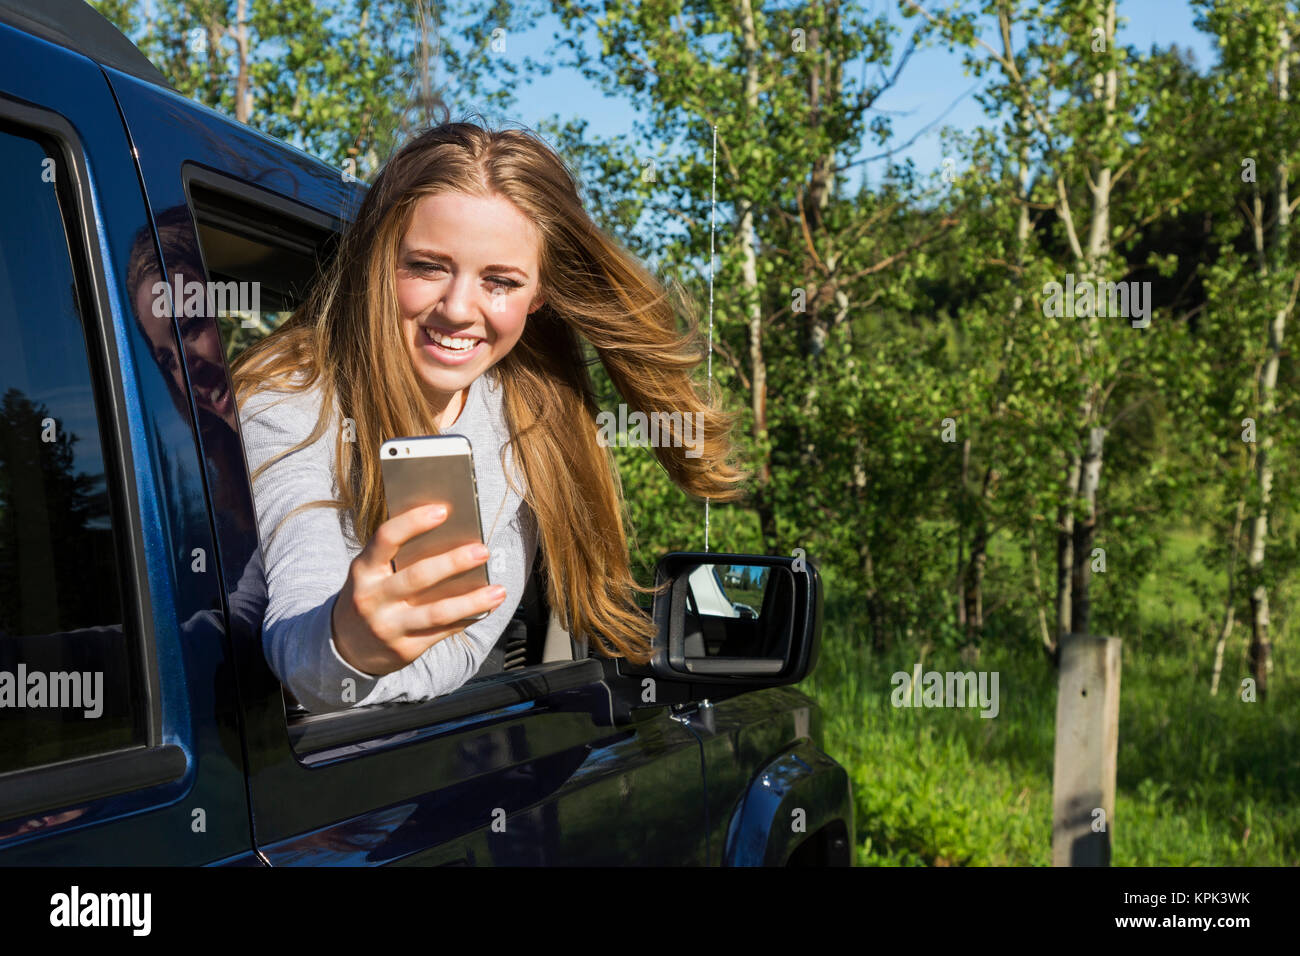 A beautiful young woman with long blond hair looking out a vehicle window and taking a self-portrait with her smart phone; Edmonton, Alberta, Canada Stock Photo